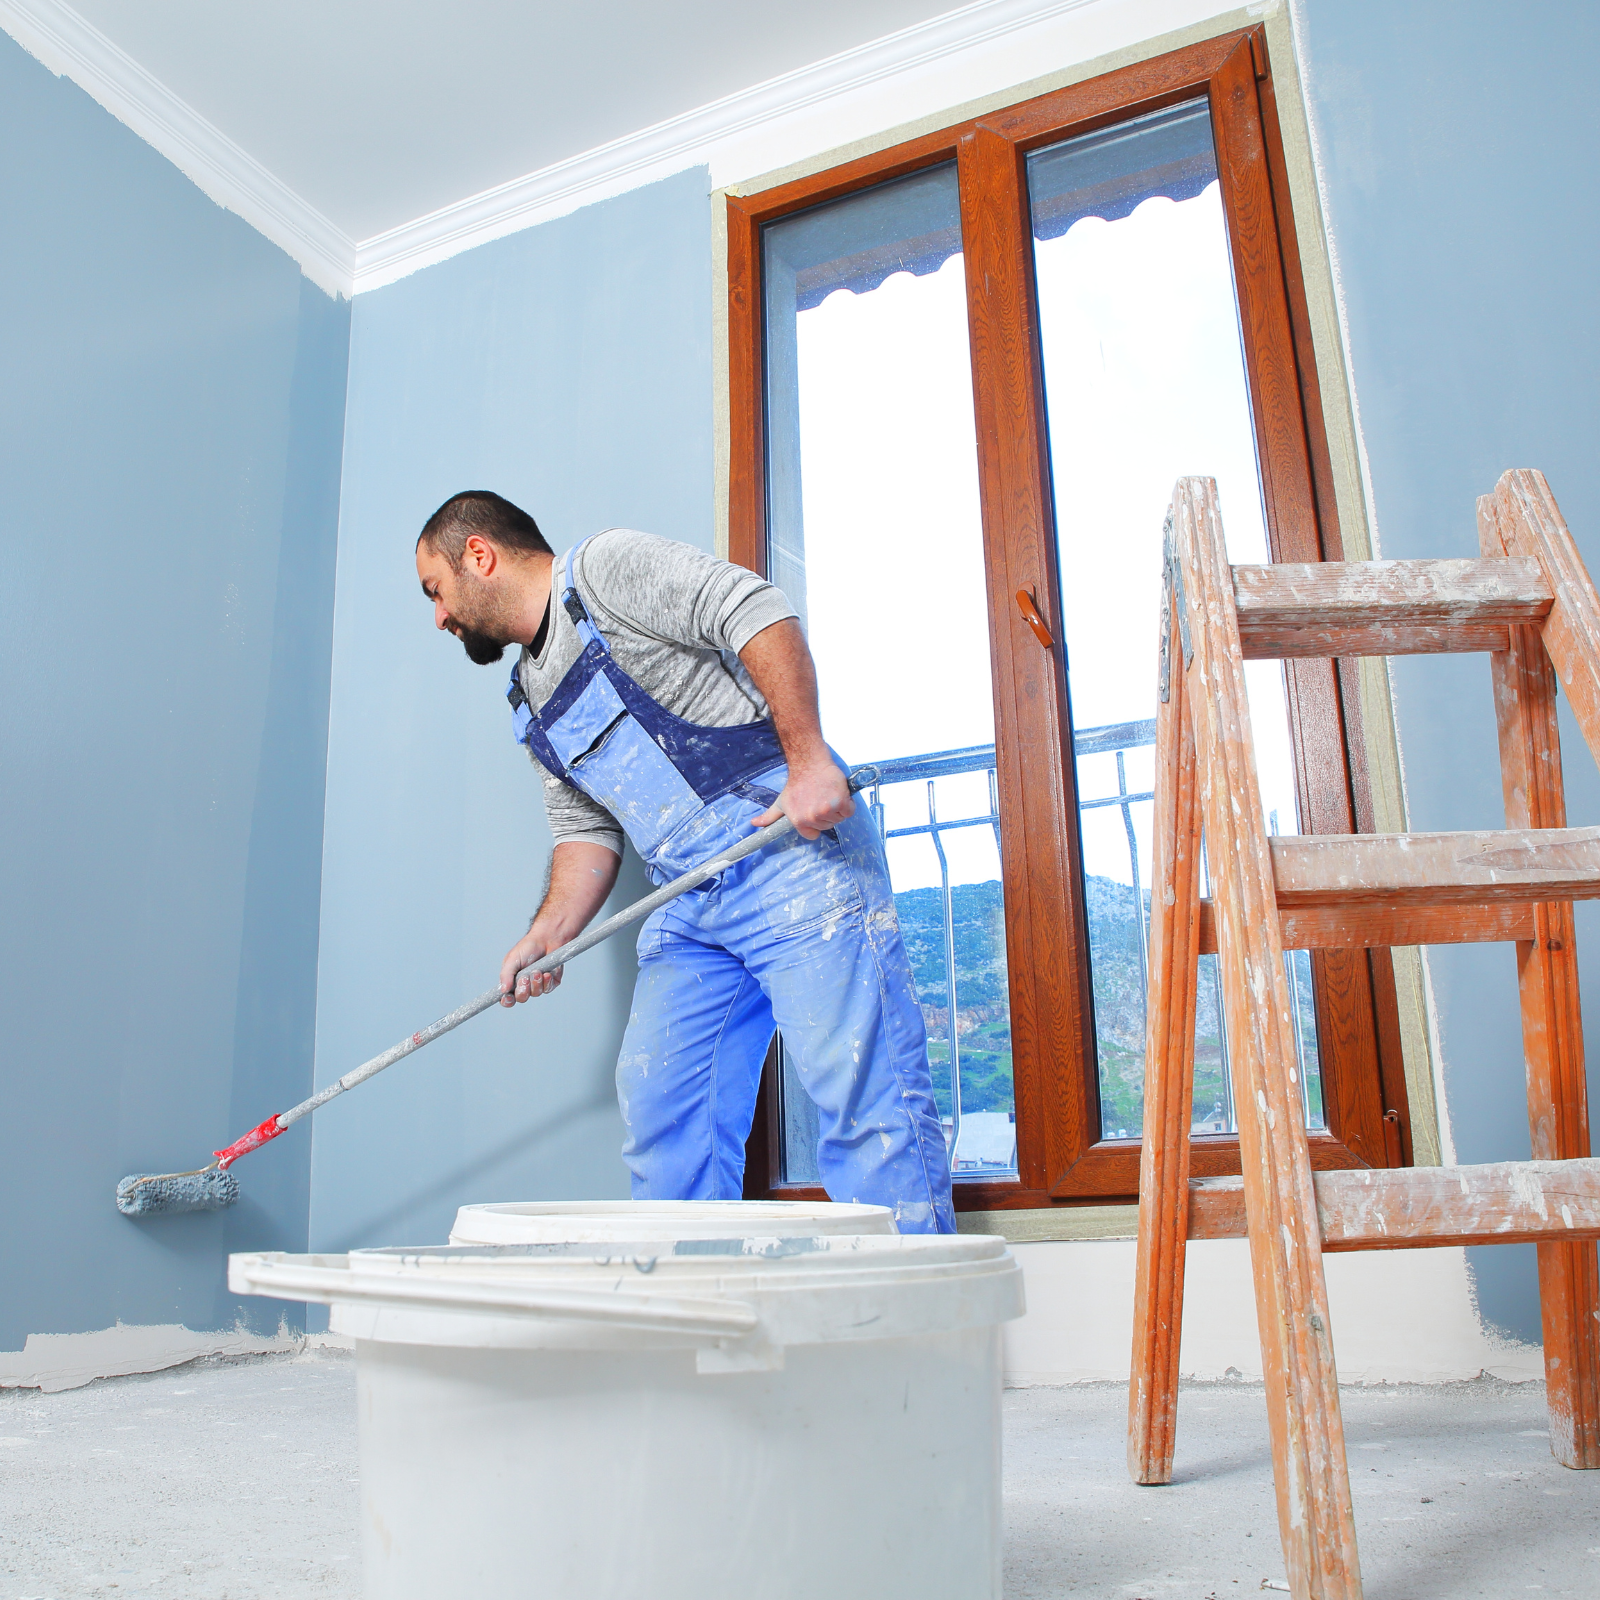 Professional painter painting a wall